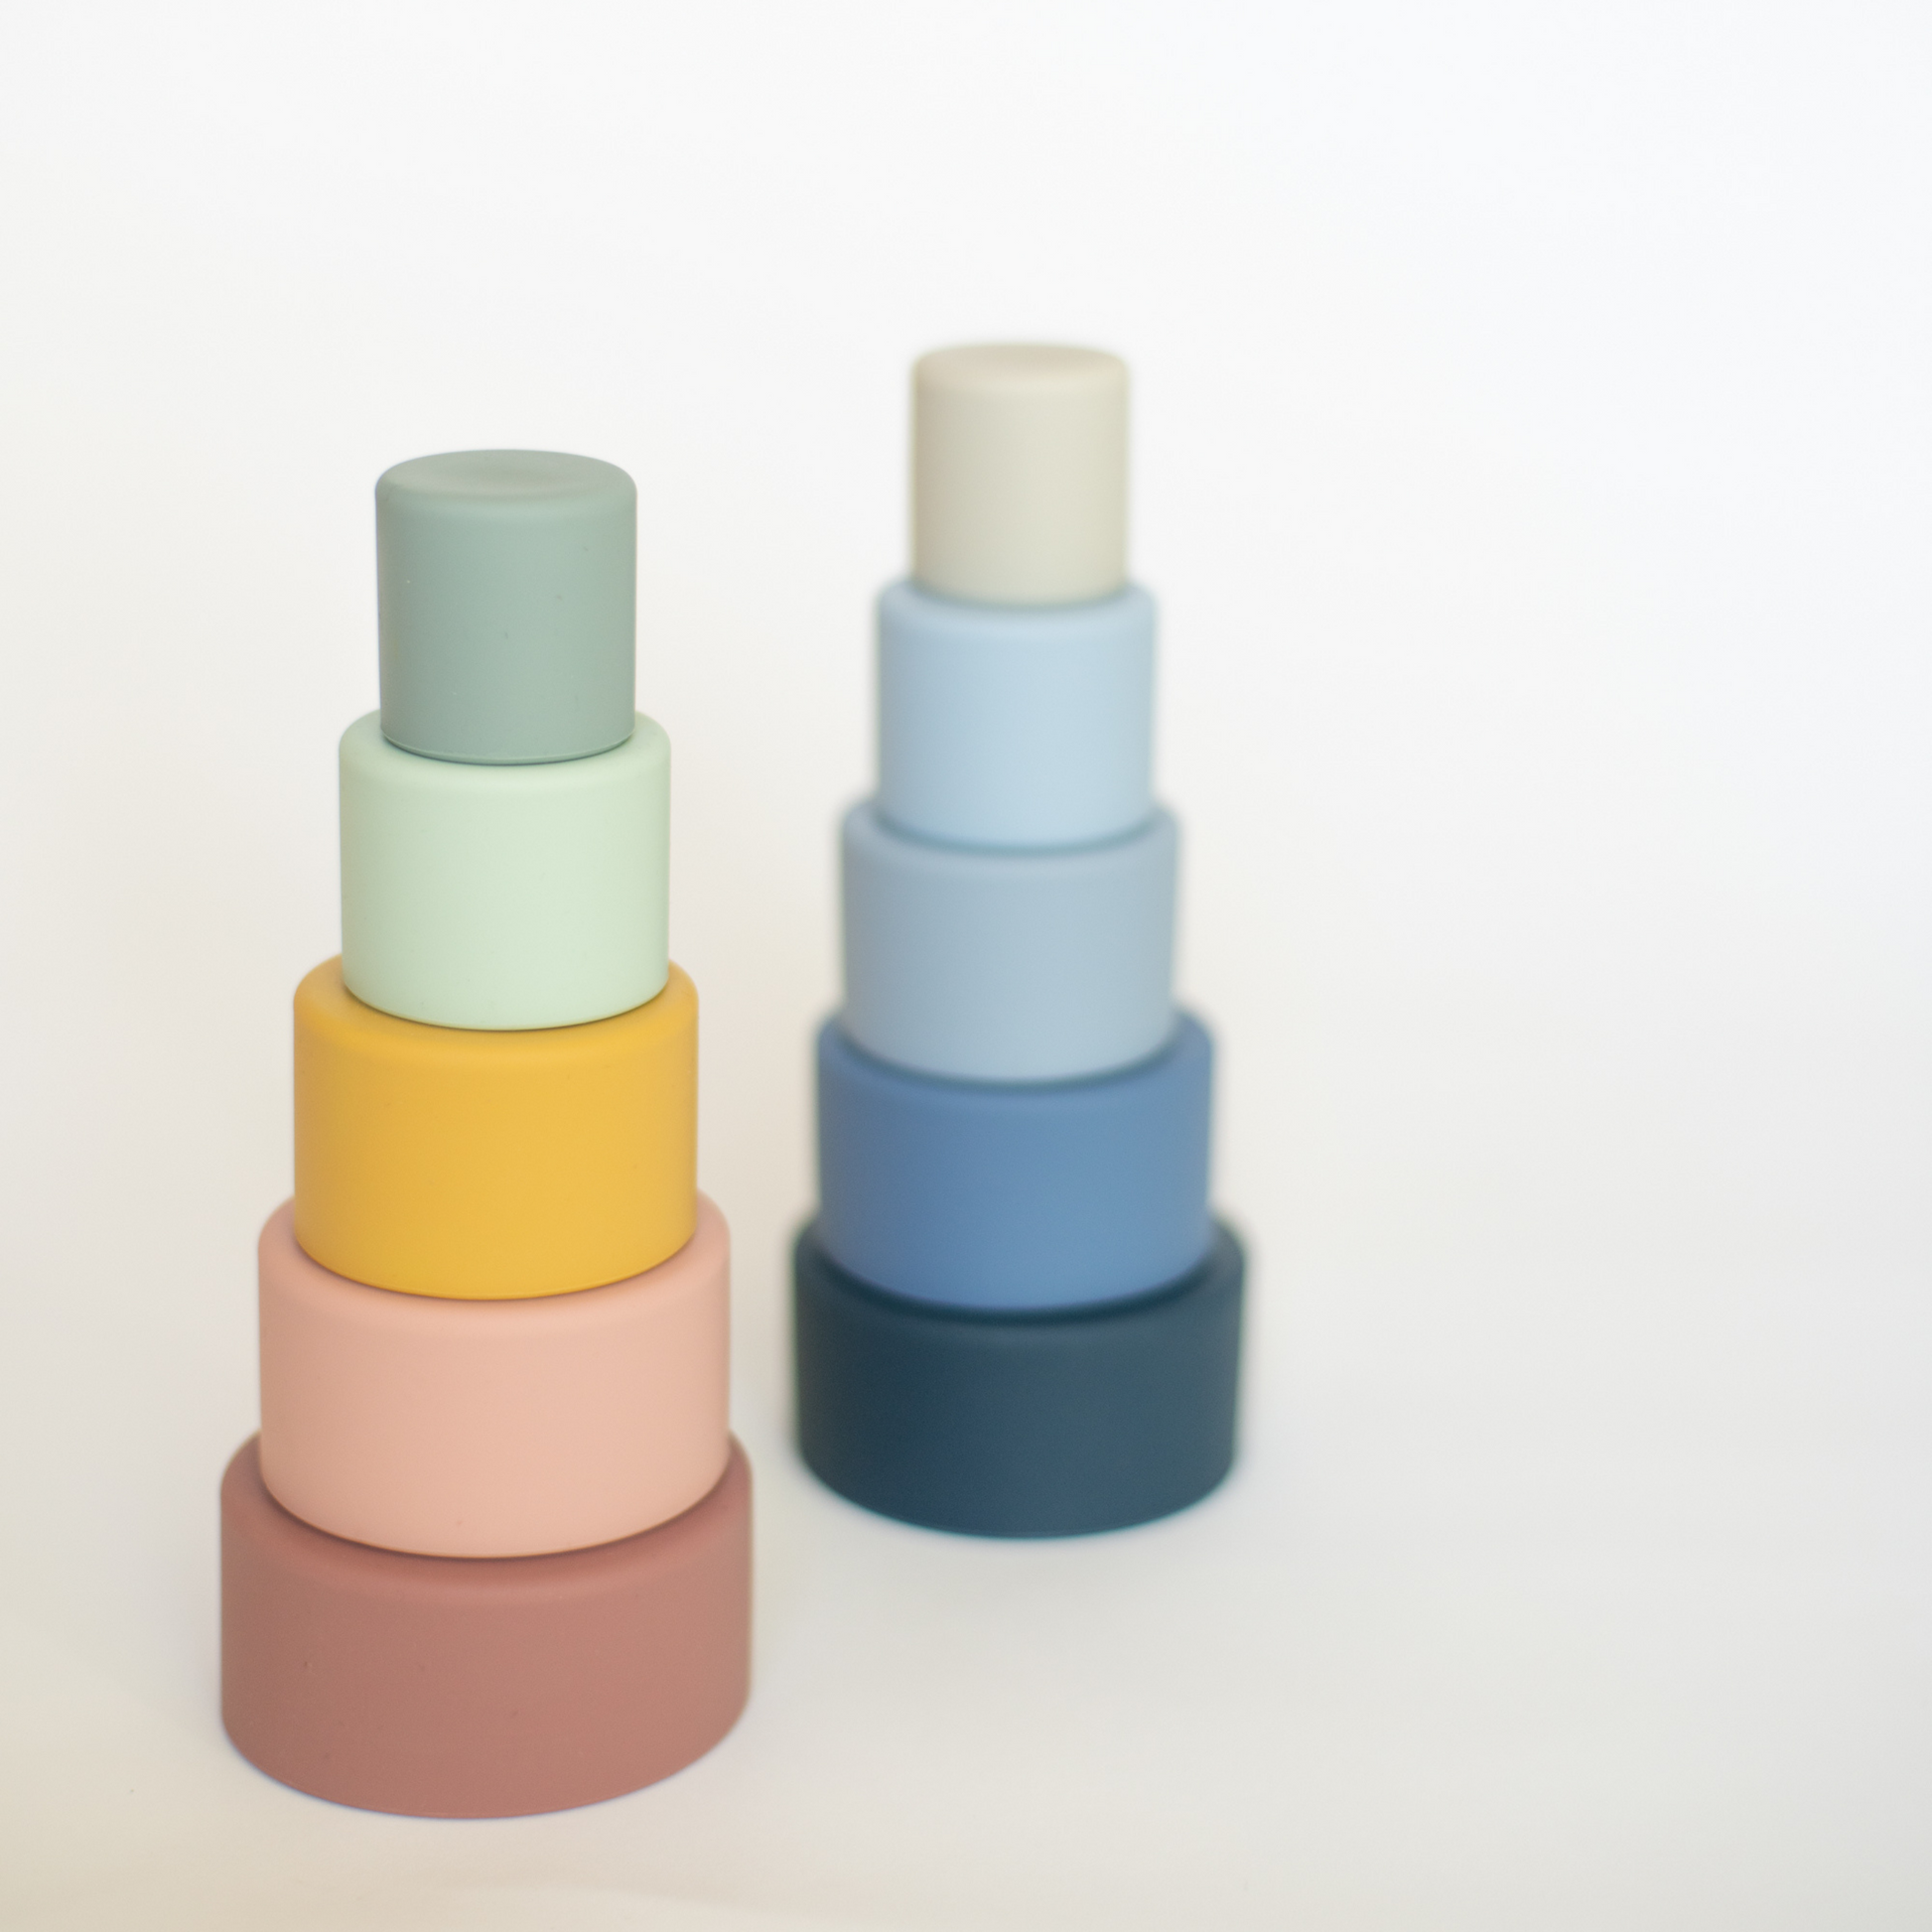 silicone cup towers. Nest and Stack them.